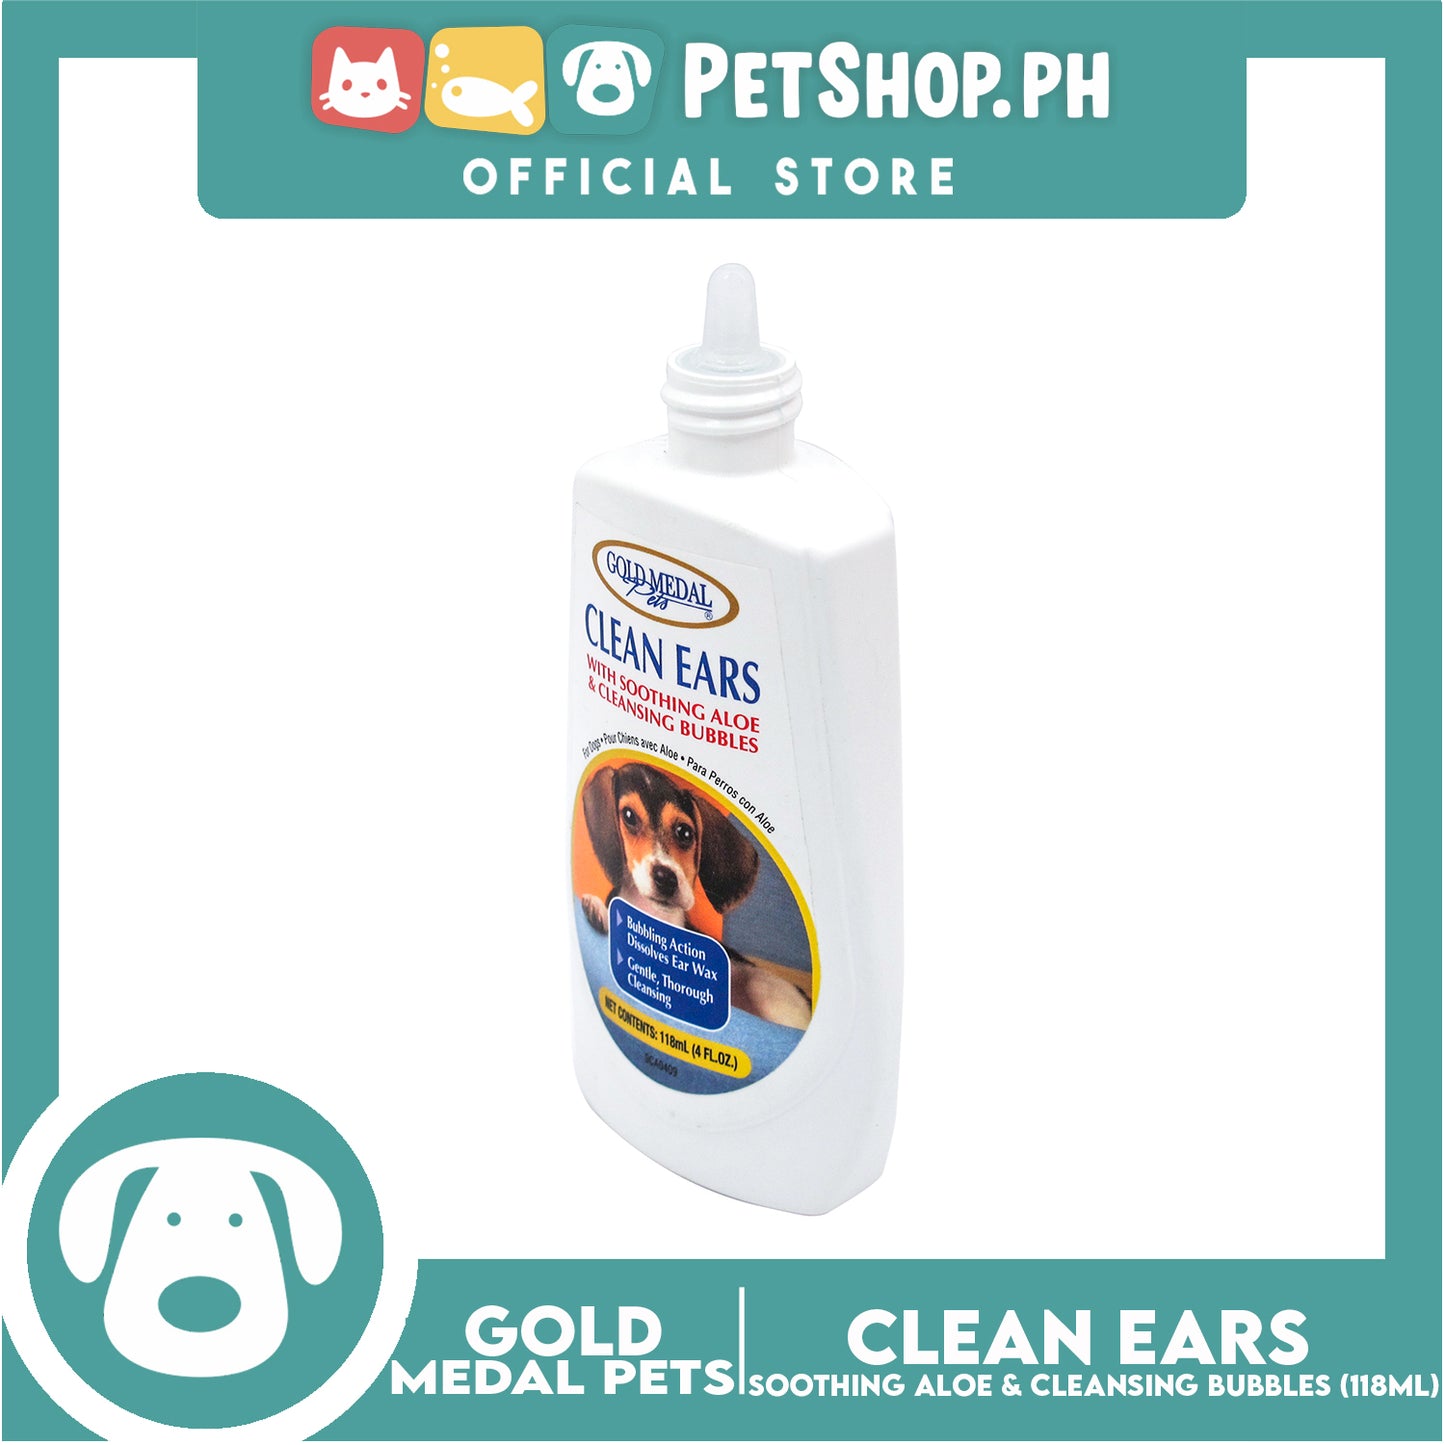 Golden Medal Pets Cleans Ears 118mL